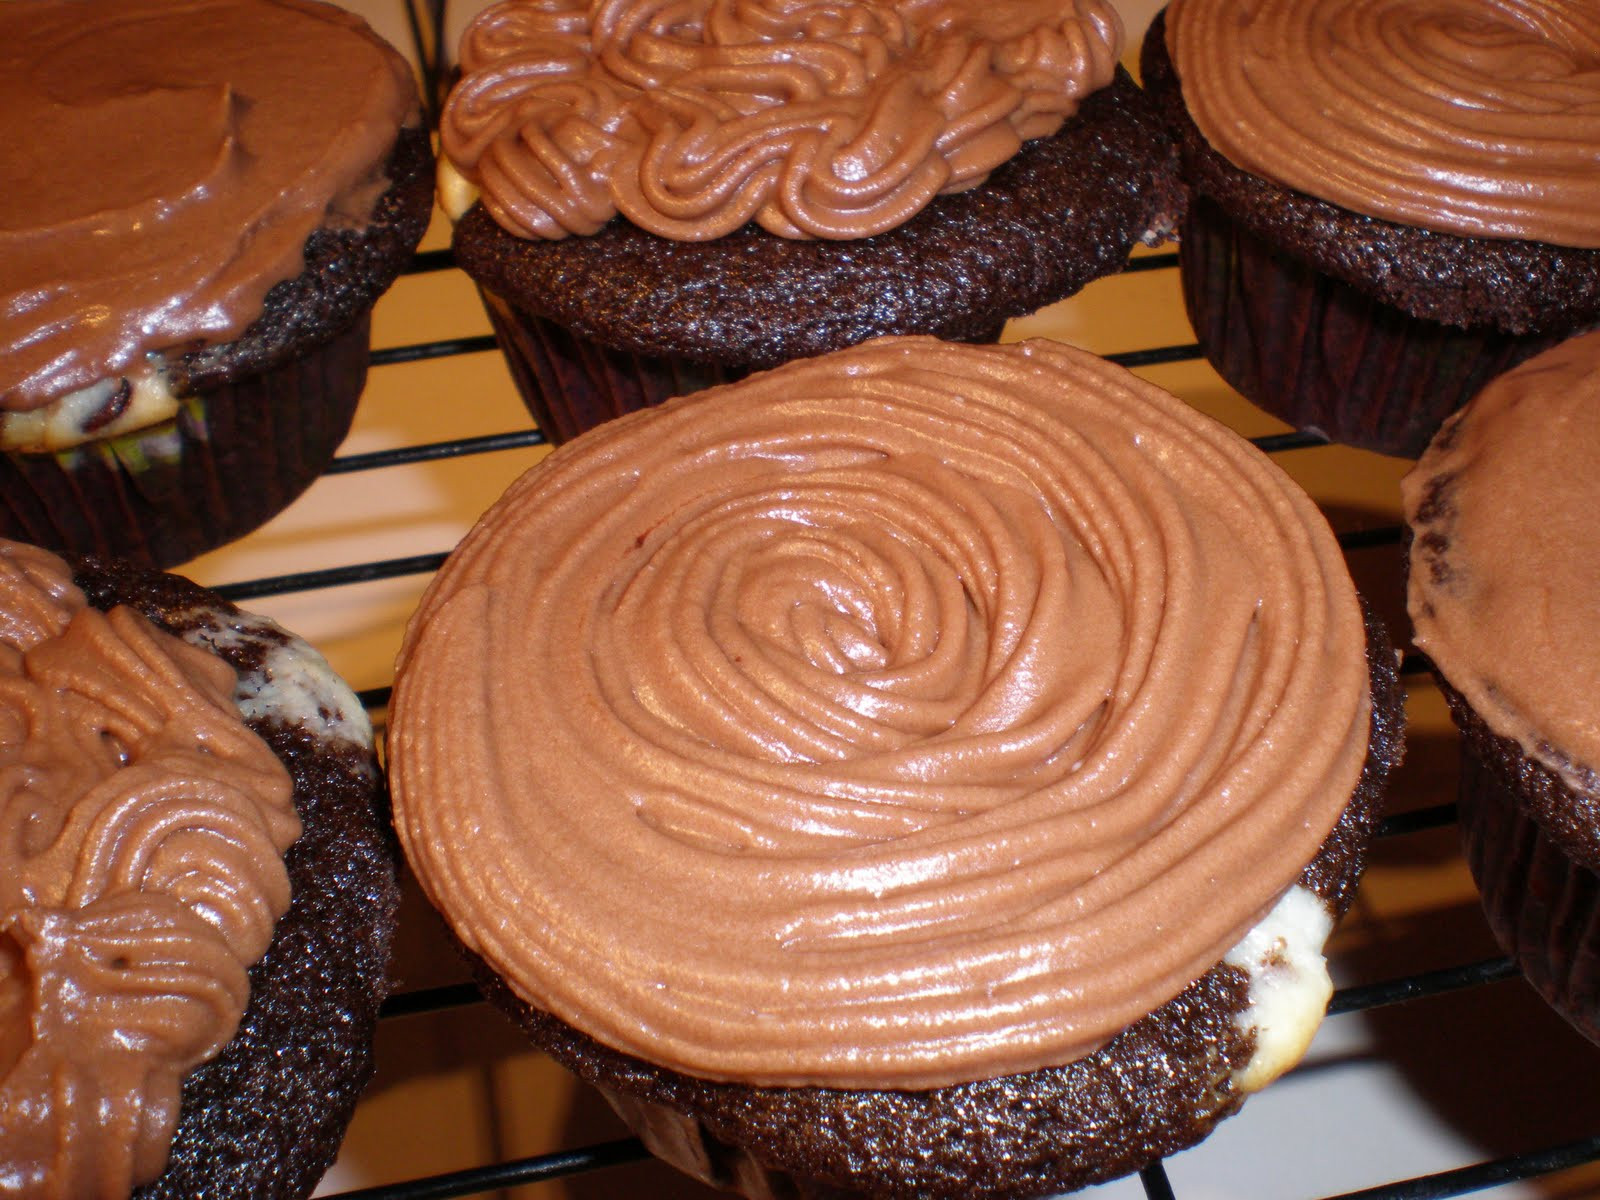 Chocolate Cupcakes With Cream Cheese Filling
 Something Food Chocolate Cream Cheese Filled Cupcakes